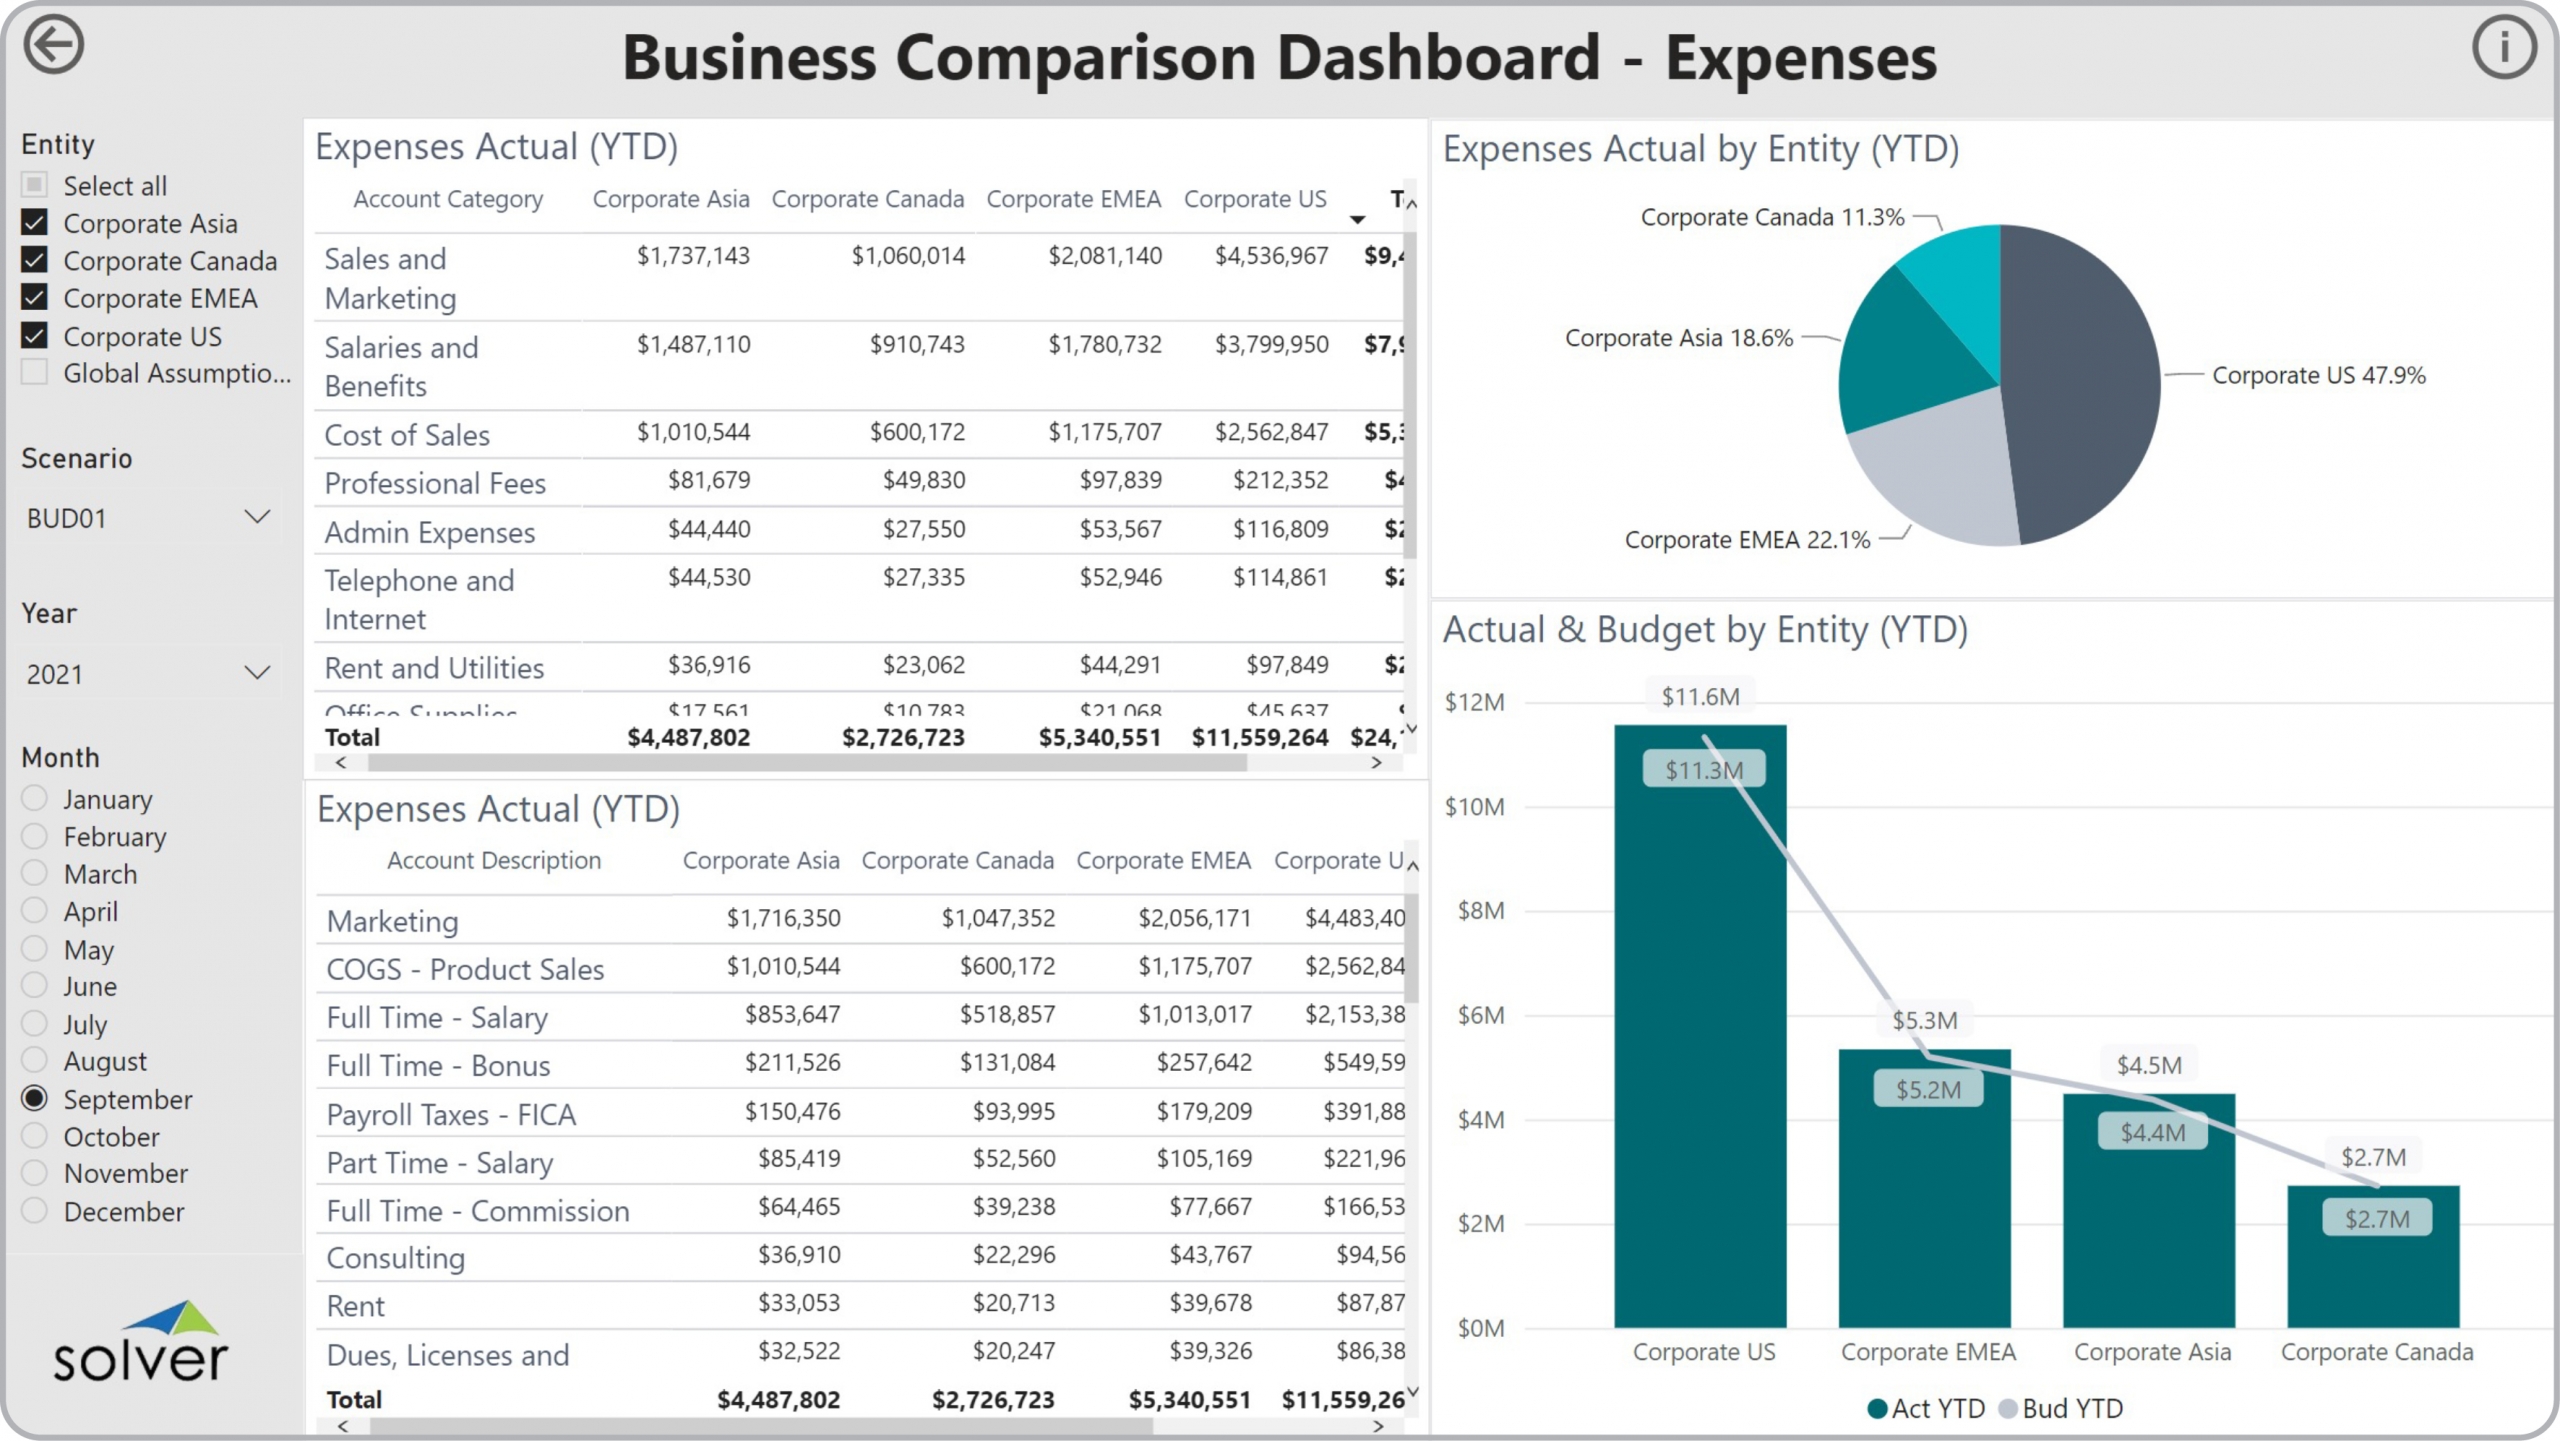 Example of an Expense Comparison Dashboard to Streamline the Monthly Reporting Process